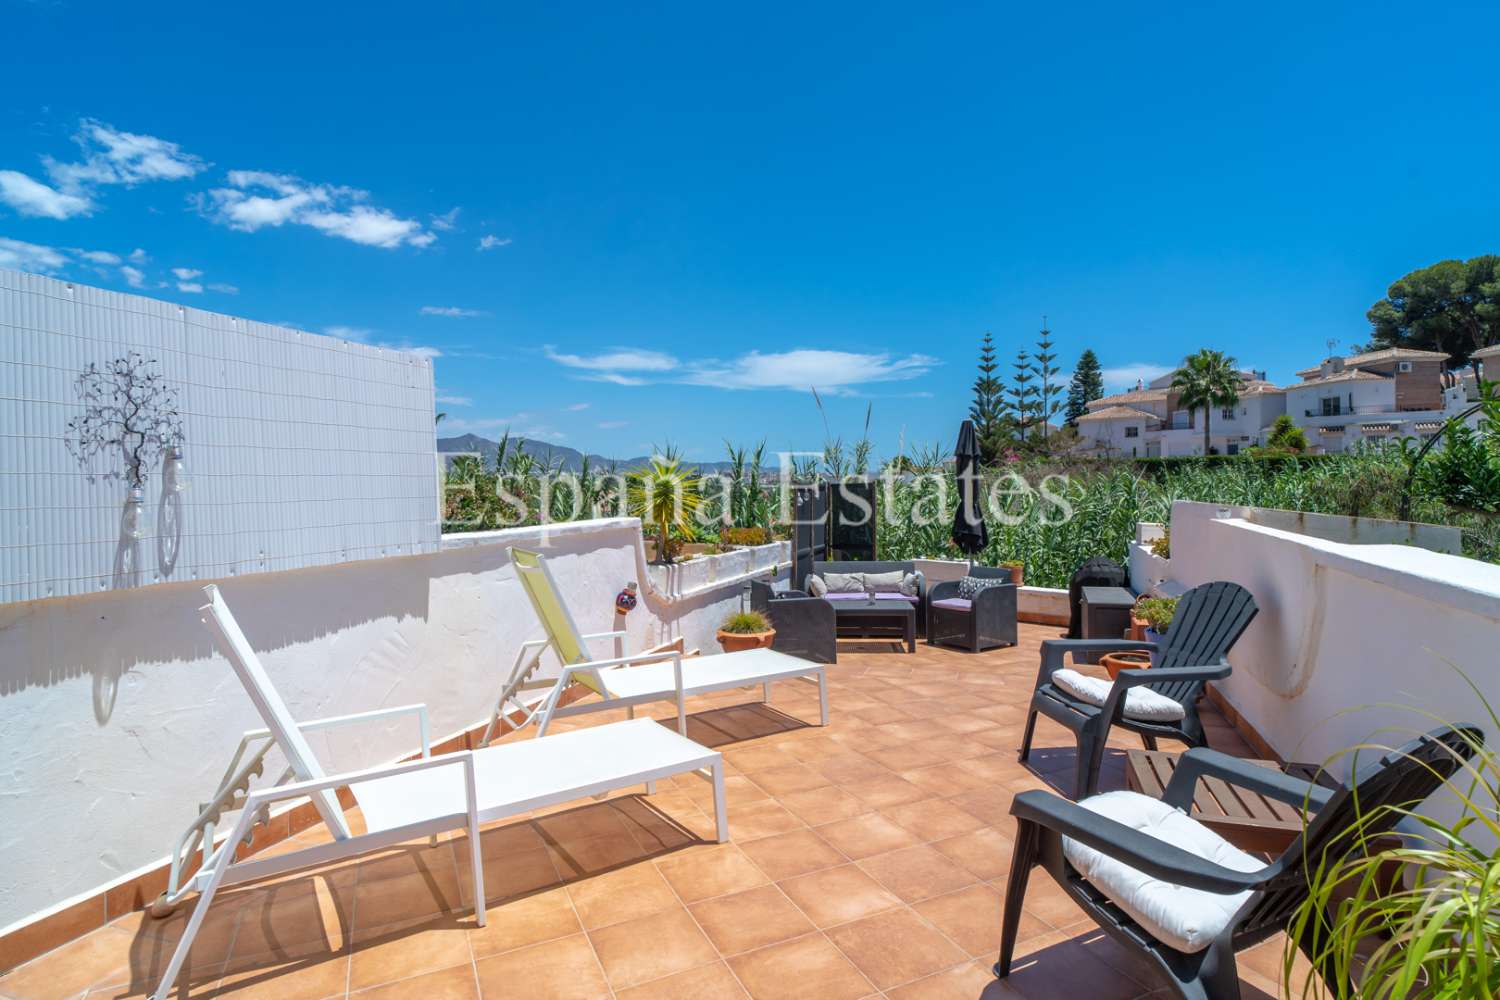 Close to the beach with pool and fantastic view!